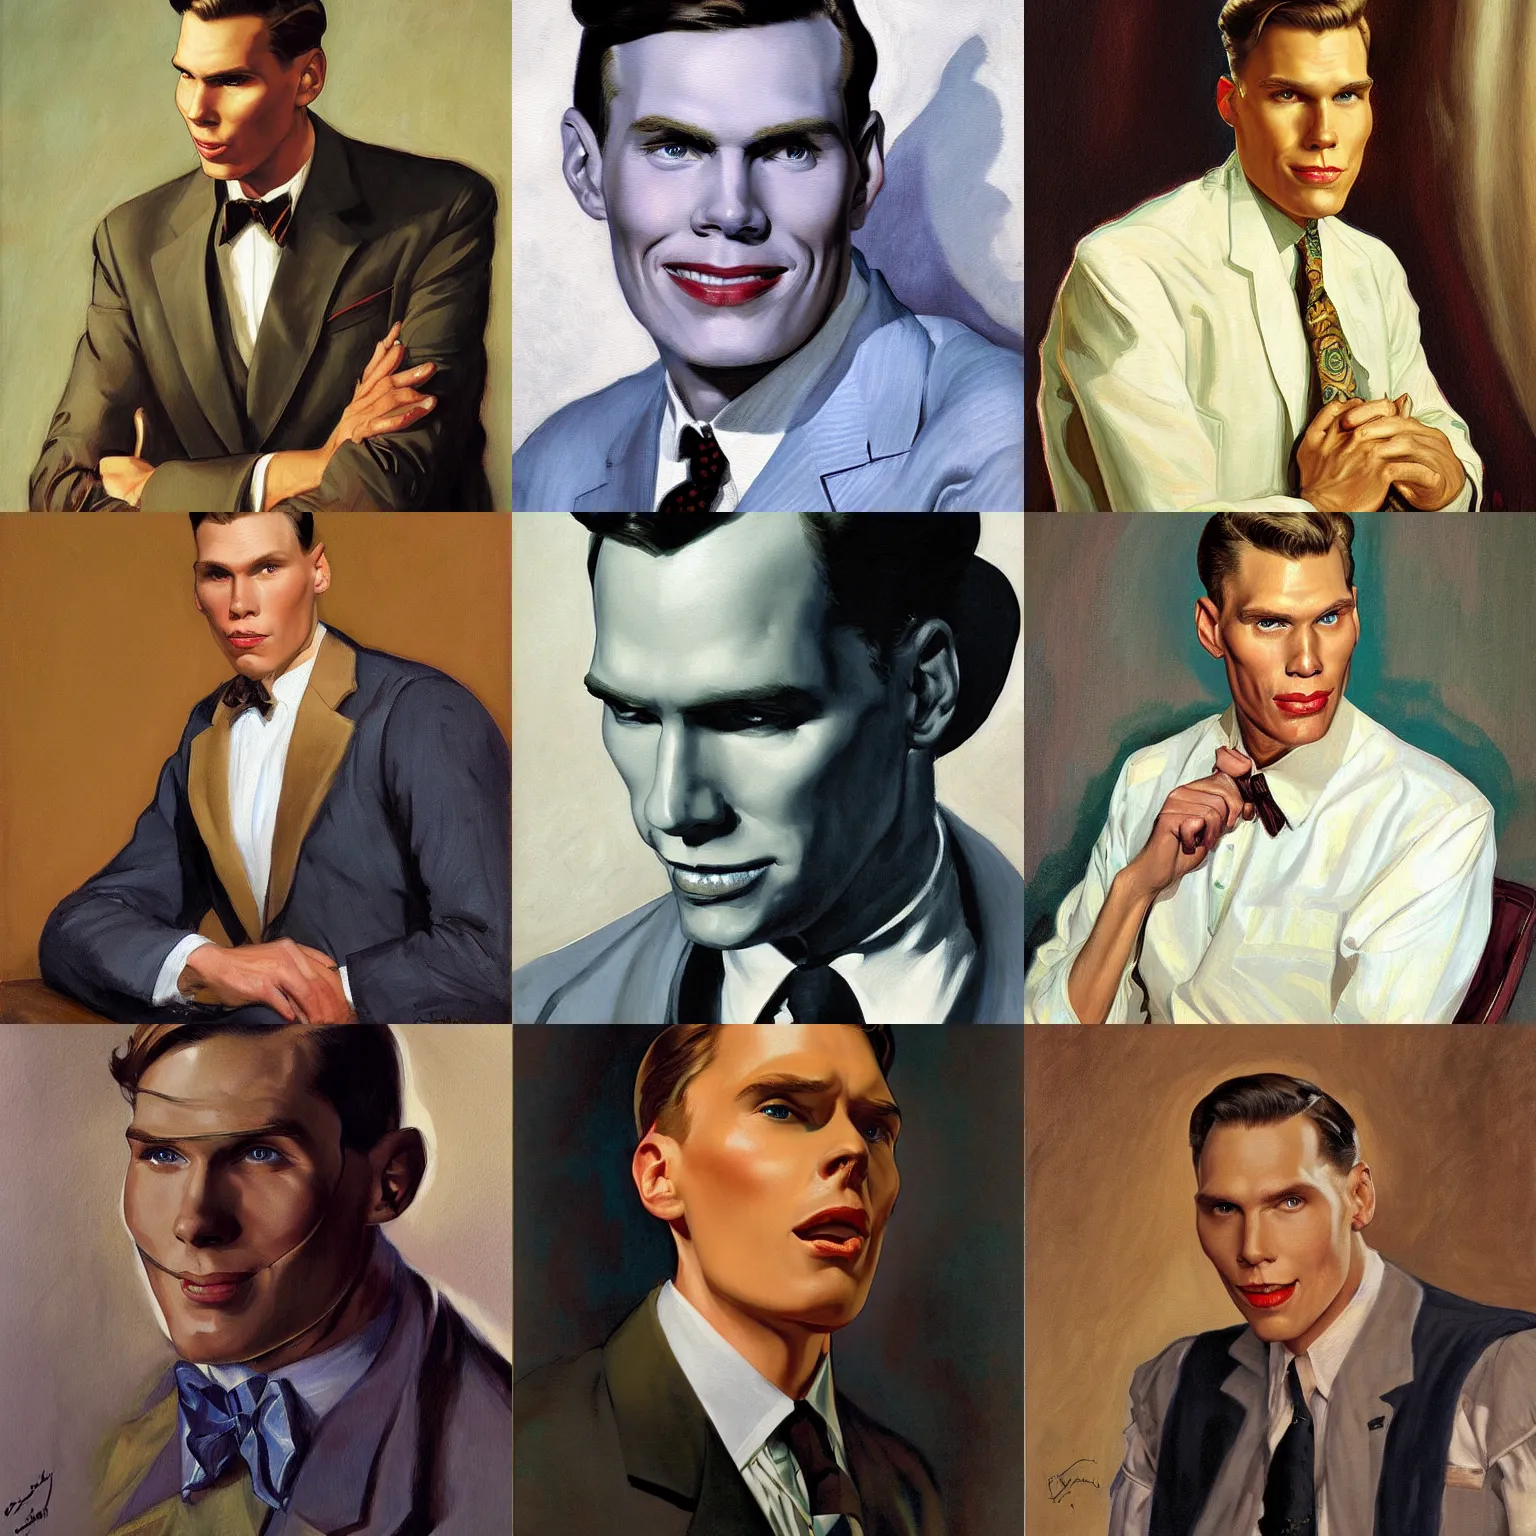 Prompt: Jerma985, unedited andy, full color painting by J.C. Leyendecker